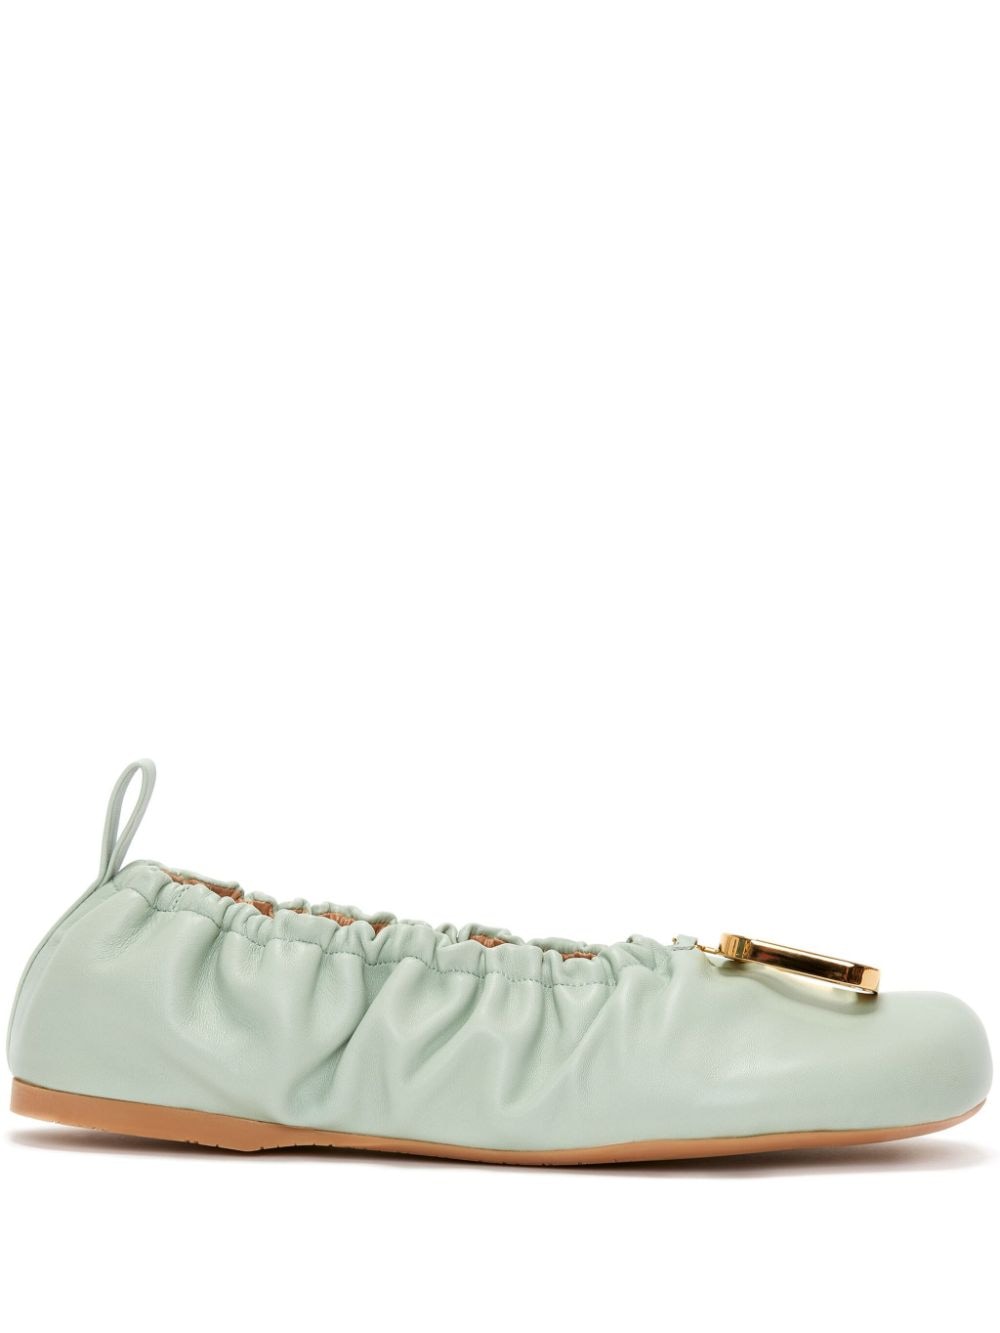 JW Anderson Puller leather ballerina shoes - Green